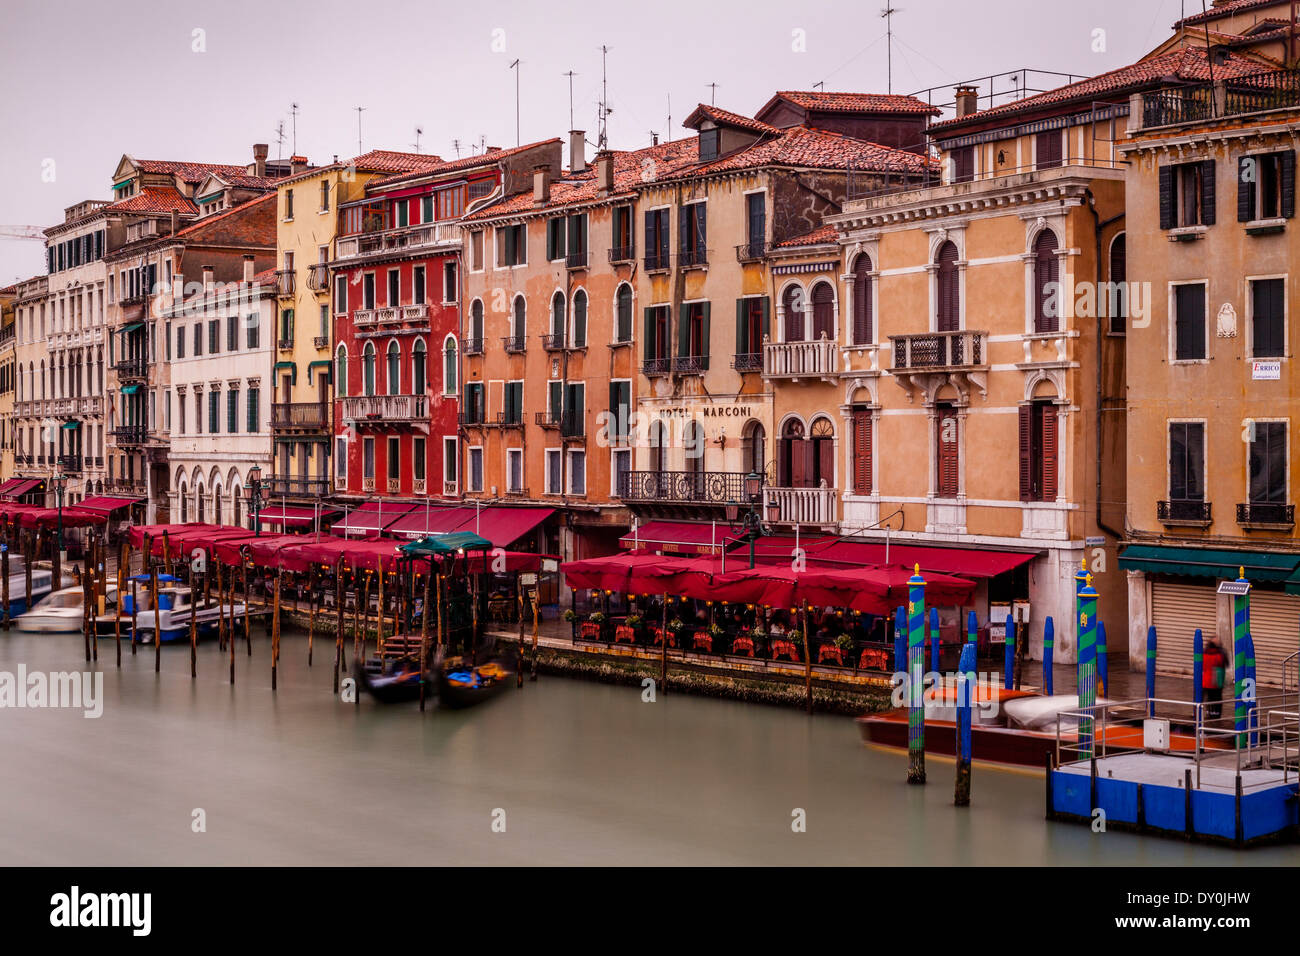 View of The Grand Canal & Venetian Architecture From The Rialto Bridge, Venice, Italy Stock Photo